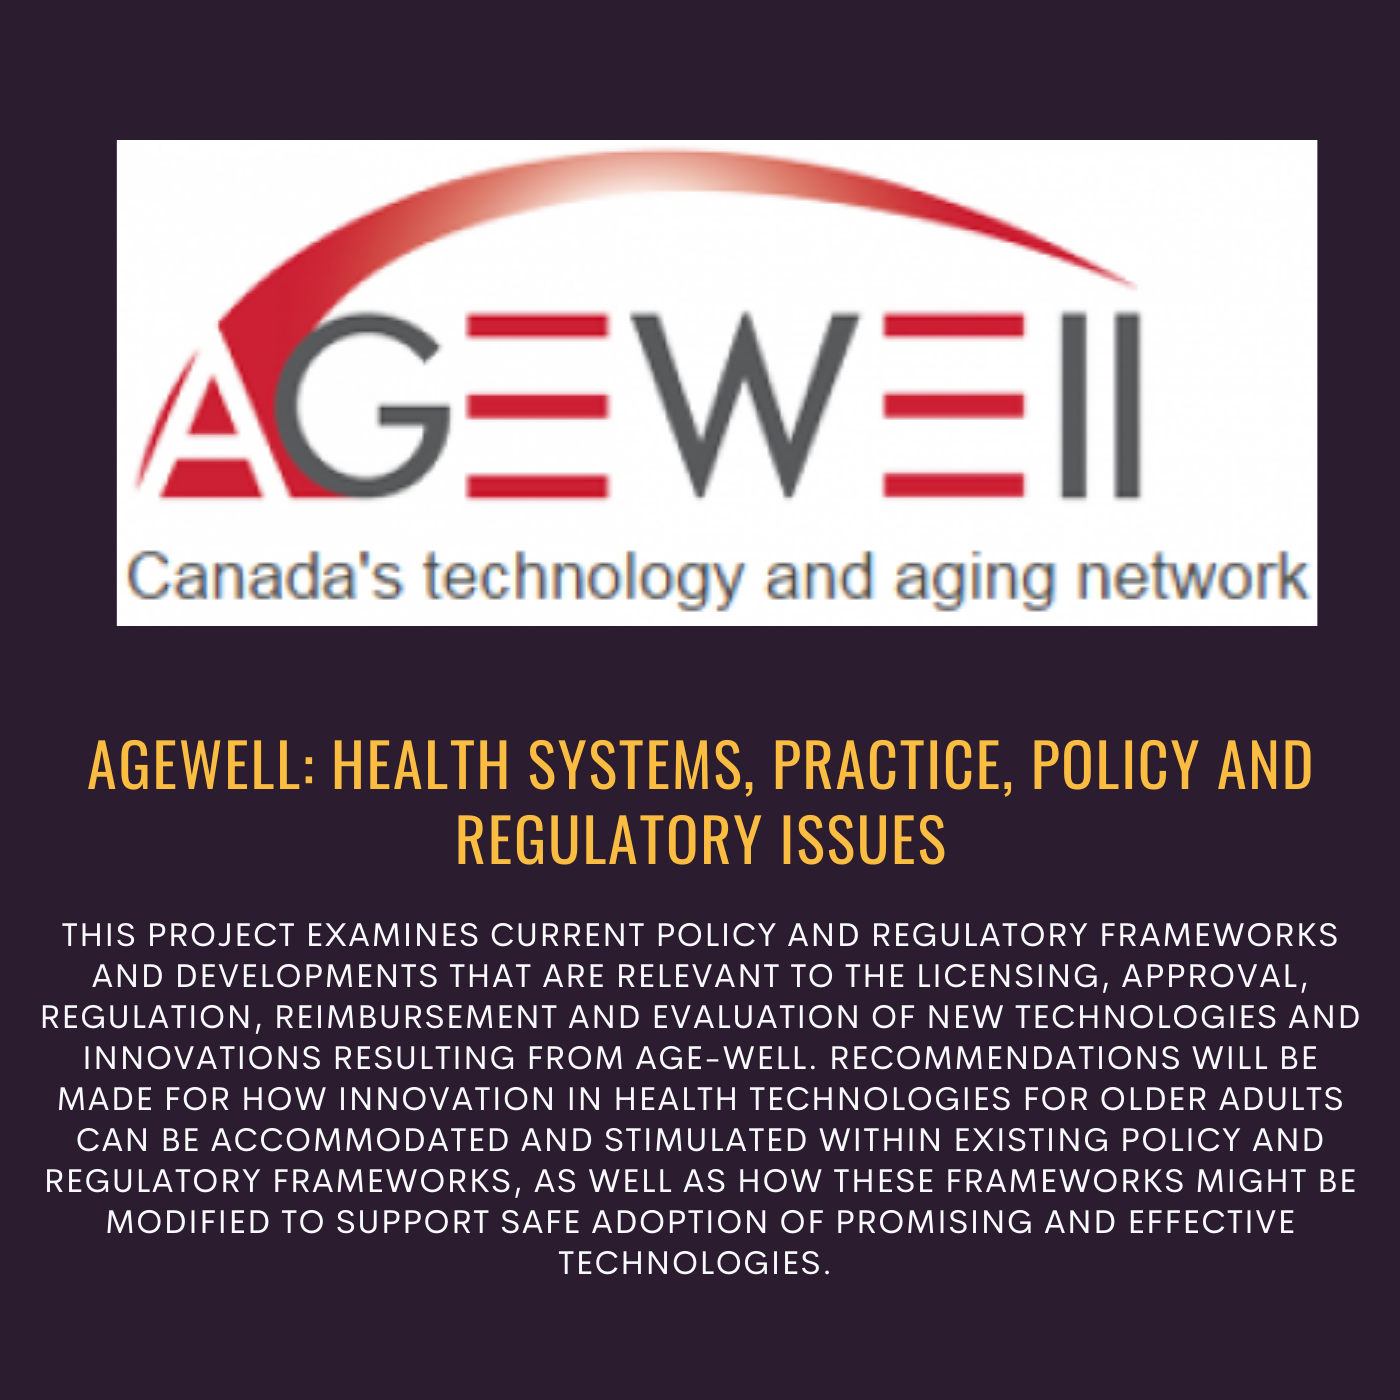 Agewell: Health systems, practice, policy and regulatory issues. This project examines current policy and regulatory frameworks and developments that are relevant to the licensing, approval, regulation, reimbursement and evaluation of new technologies and innovations resulting from age-well. Reccomendations will be made for how innovation in health technologies for older adults can be accommodated and stimulated within existing policy and regulatory frameworks, as well as how these frameworks might be modified to support safe adoption of promising and effective technologies.  Logo for AgeWell Canada's technology and aging network 